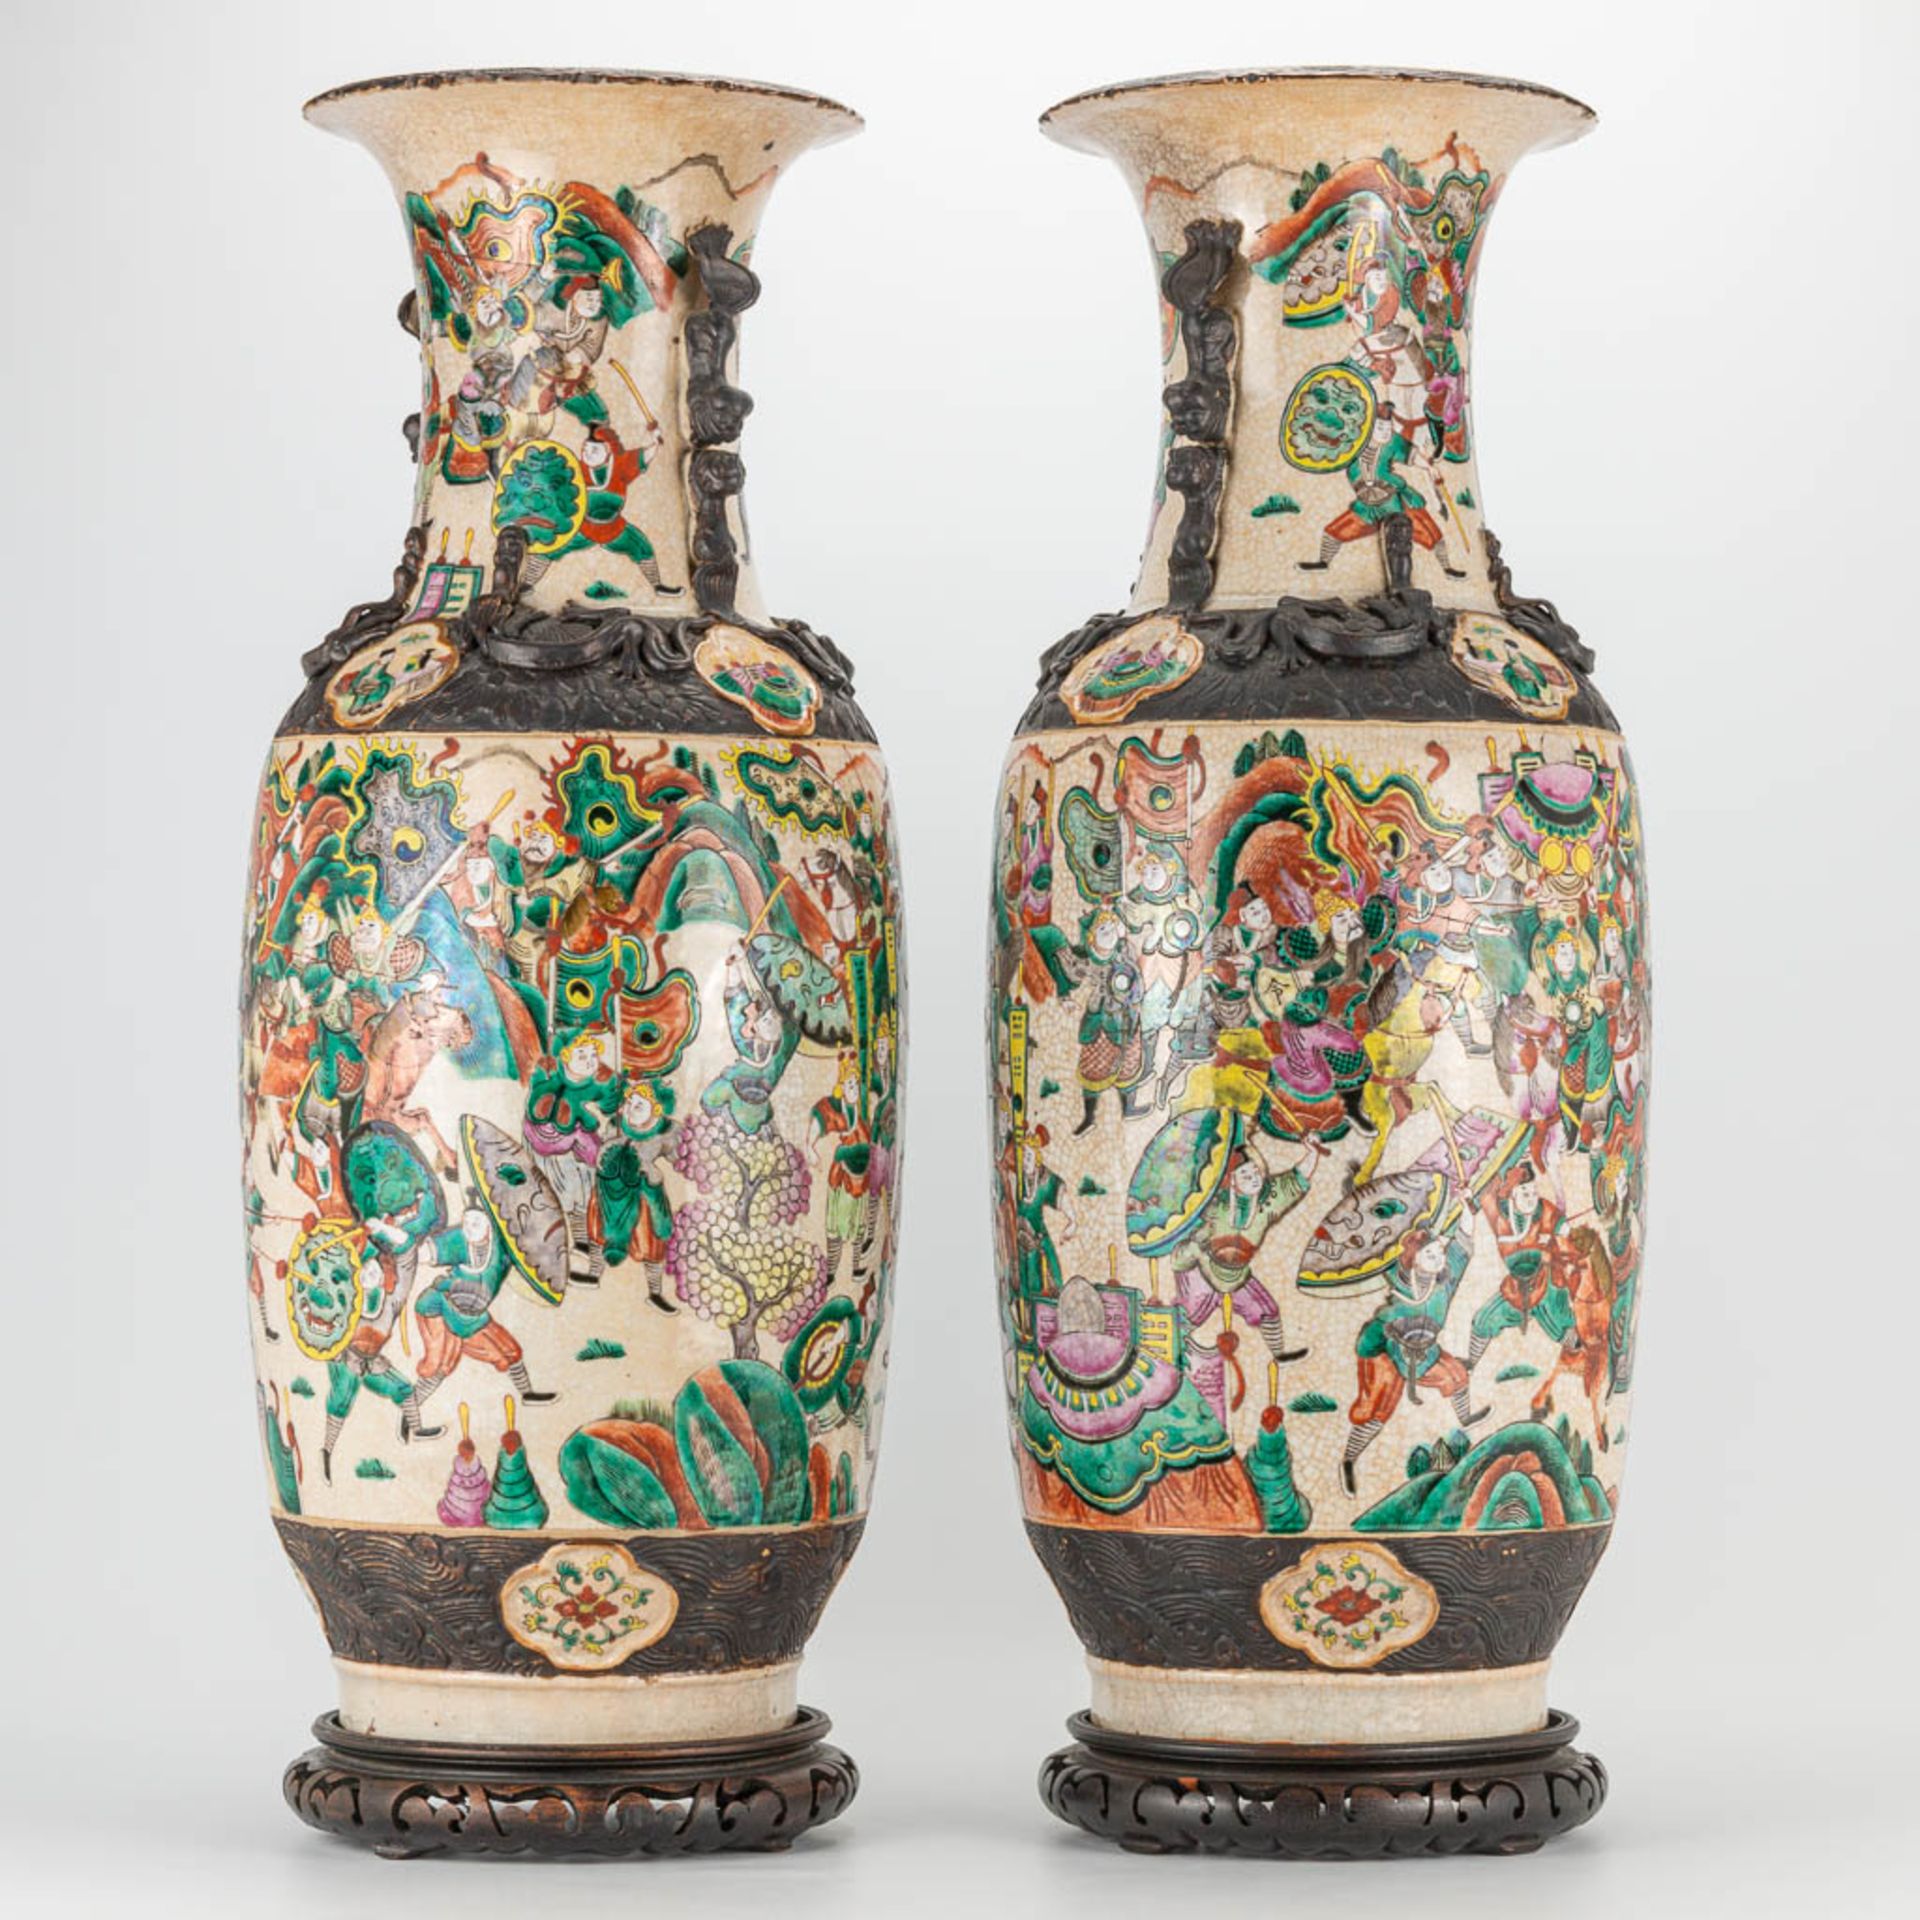 A pair of large Nanking Chinese vases with decor of warriors. 19th/20th century. (62 x 24 cm) - Image 12 of 29